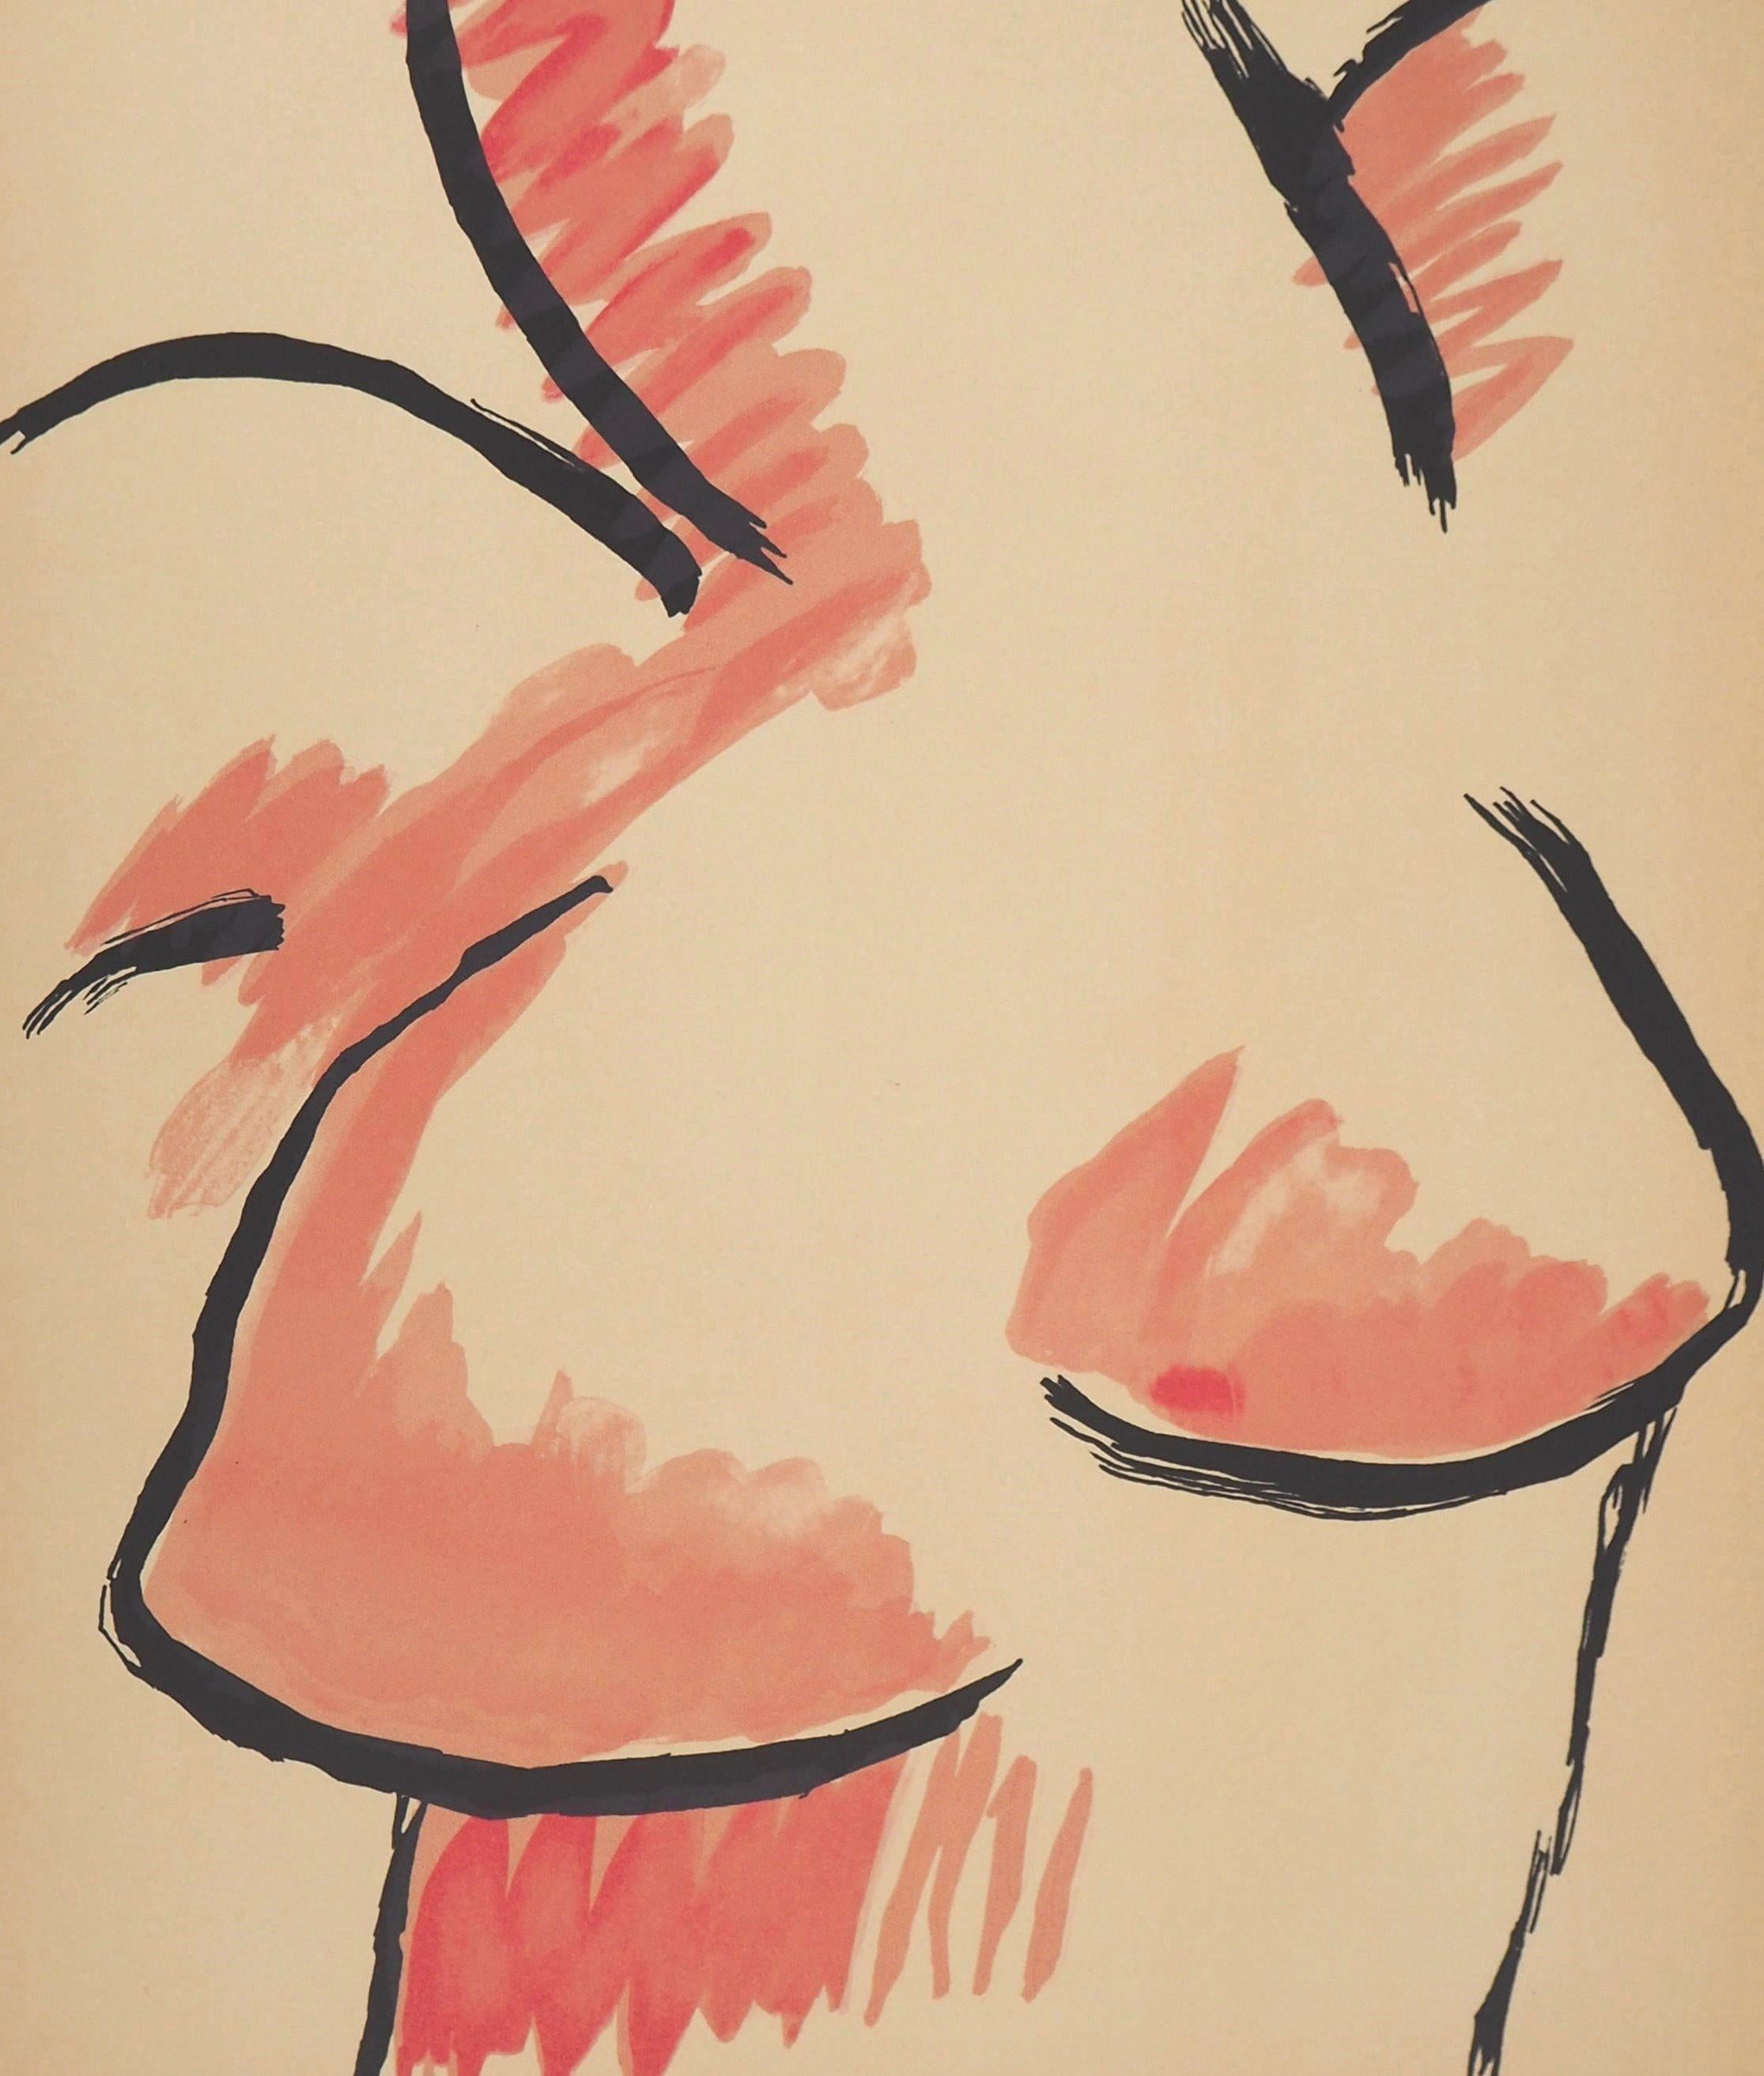 Man RAY (Emmanuel Radnitsky, aka)
Woman Bust, 1971

Handsigned original lithograph
On Arches vellum, 50.5 x 36 cm (c. 19.6 x 14,1 inch)
Edition limited to 180 copies (unnumbered exemplar)

INFORMATION : This lithograph is part of the set 